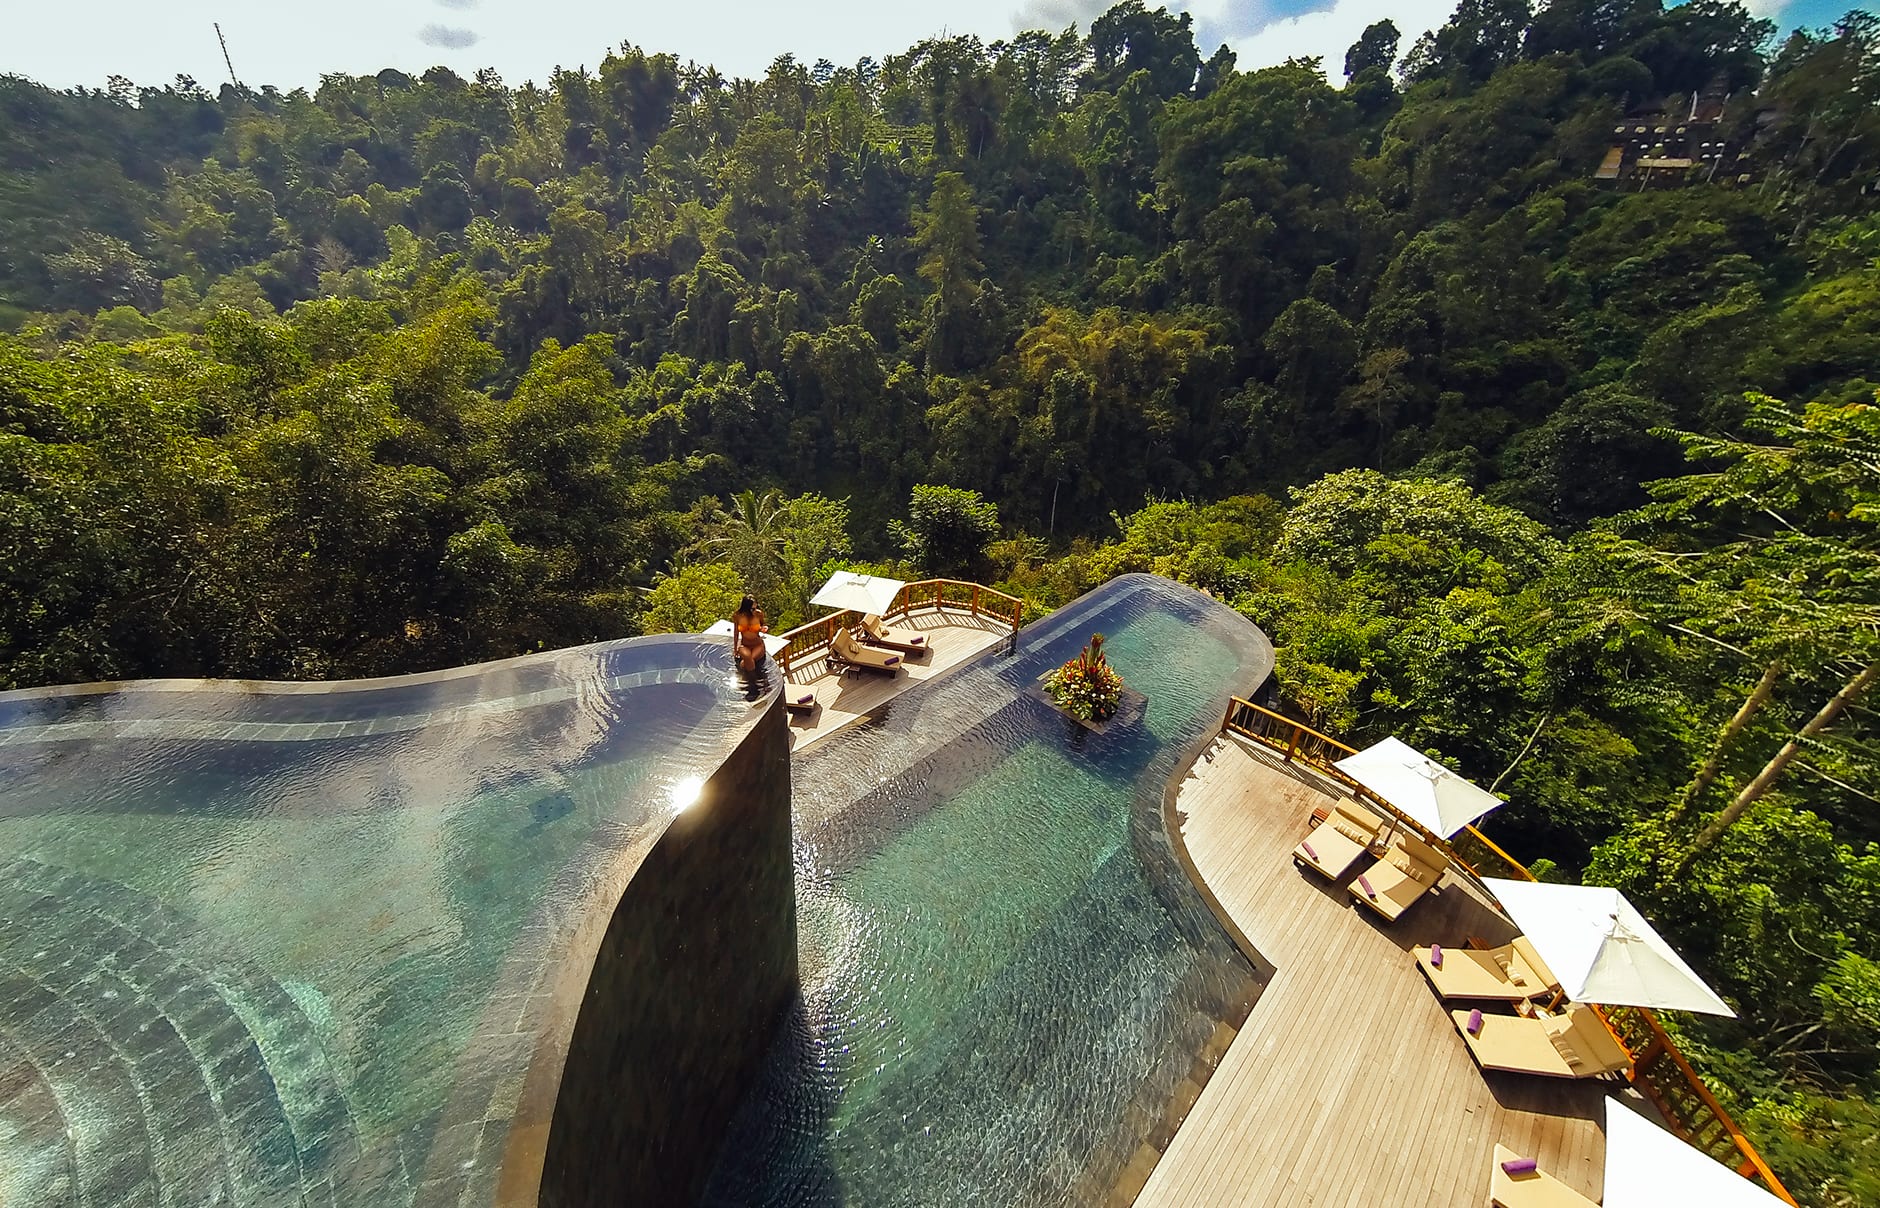 Hanging Gardens Of Bali, Ubud, Indonesia • Review by TravelPlusStyle